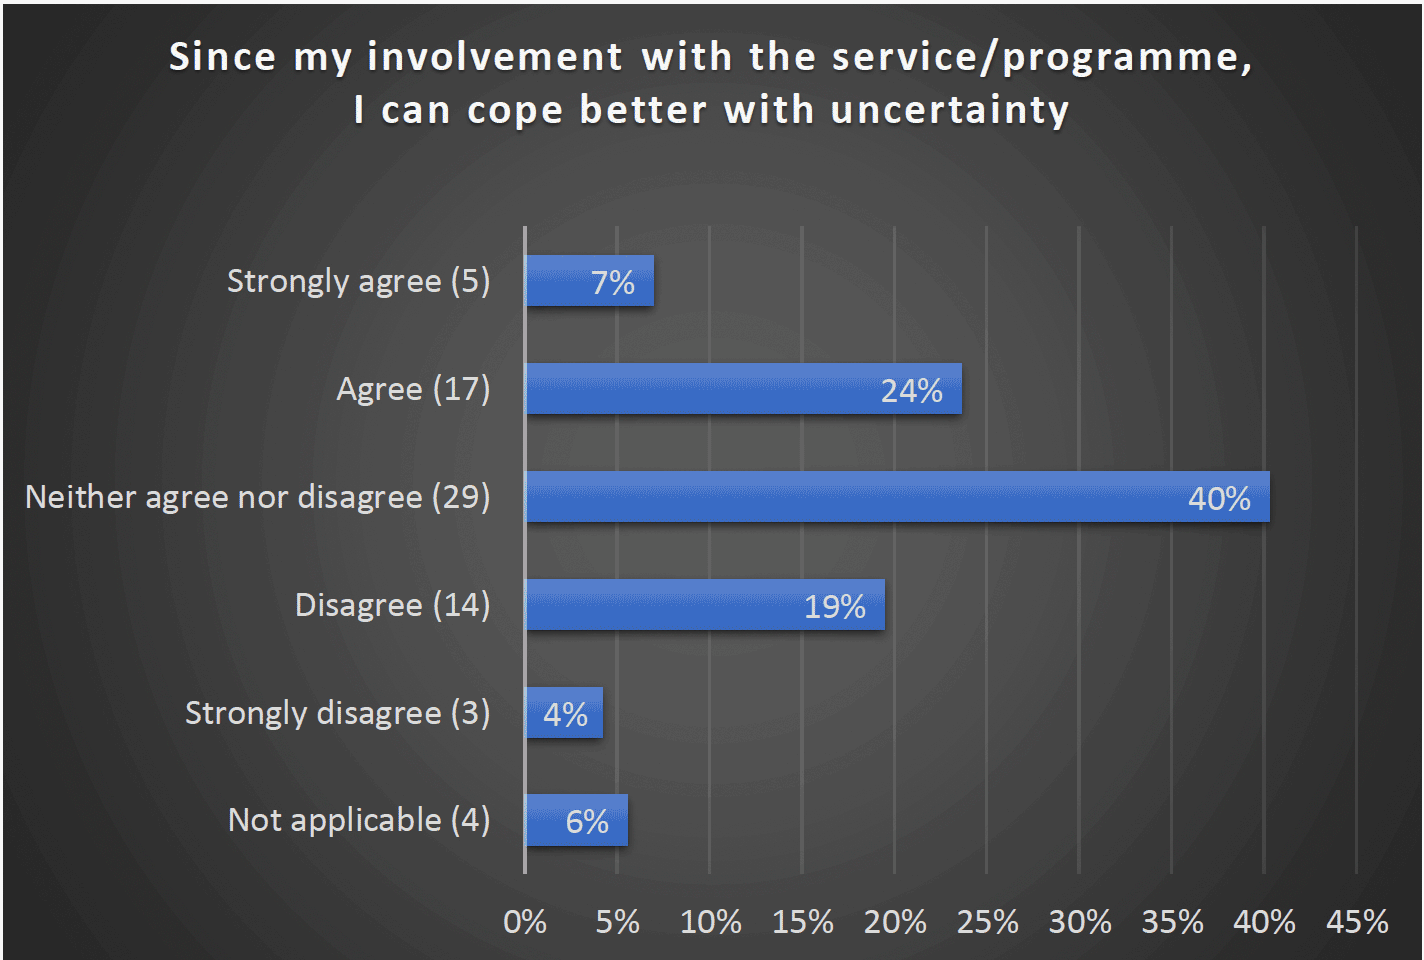 Since my involvement with the service/programme, I can cope better with uncertainty - Strongly agree (5) 7%, Agree (17) 24%, Neither agree nor disagree (29) 40%, Disagree (14) 19%, Strongly disagree (3) 4%, Not applicable (4) 6%